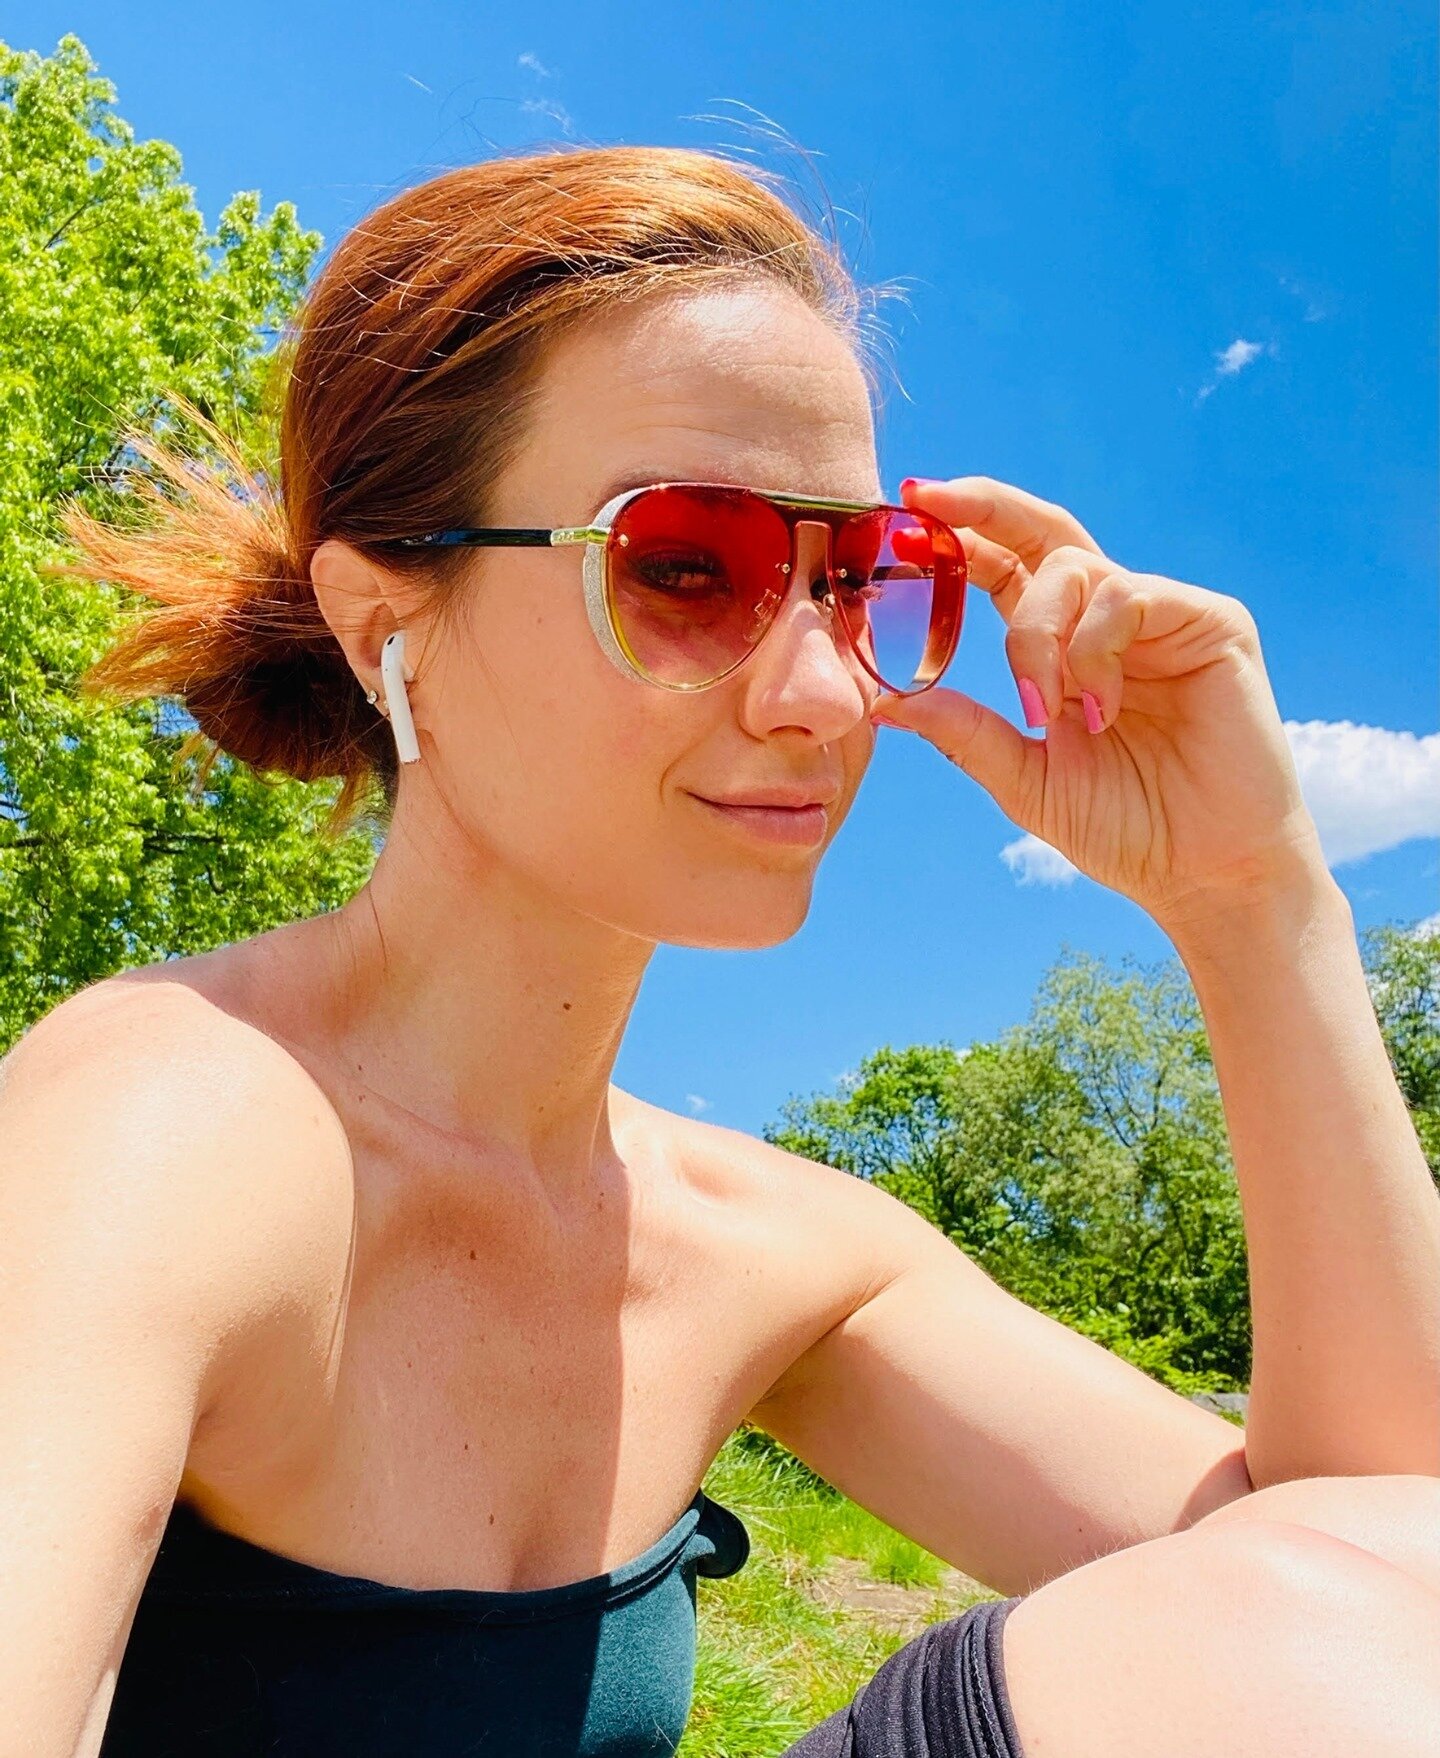 @officialsierraboggess is styling in these @tradinglooks sunglasses😎